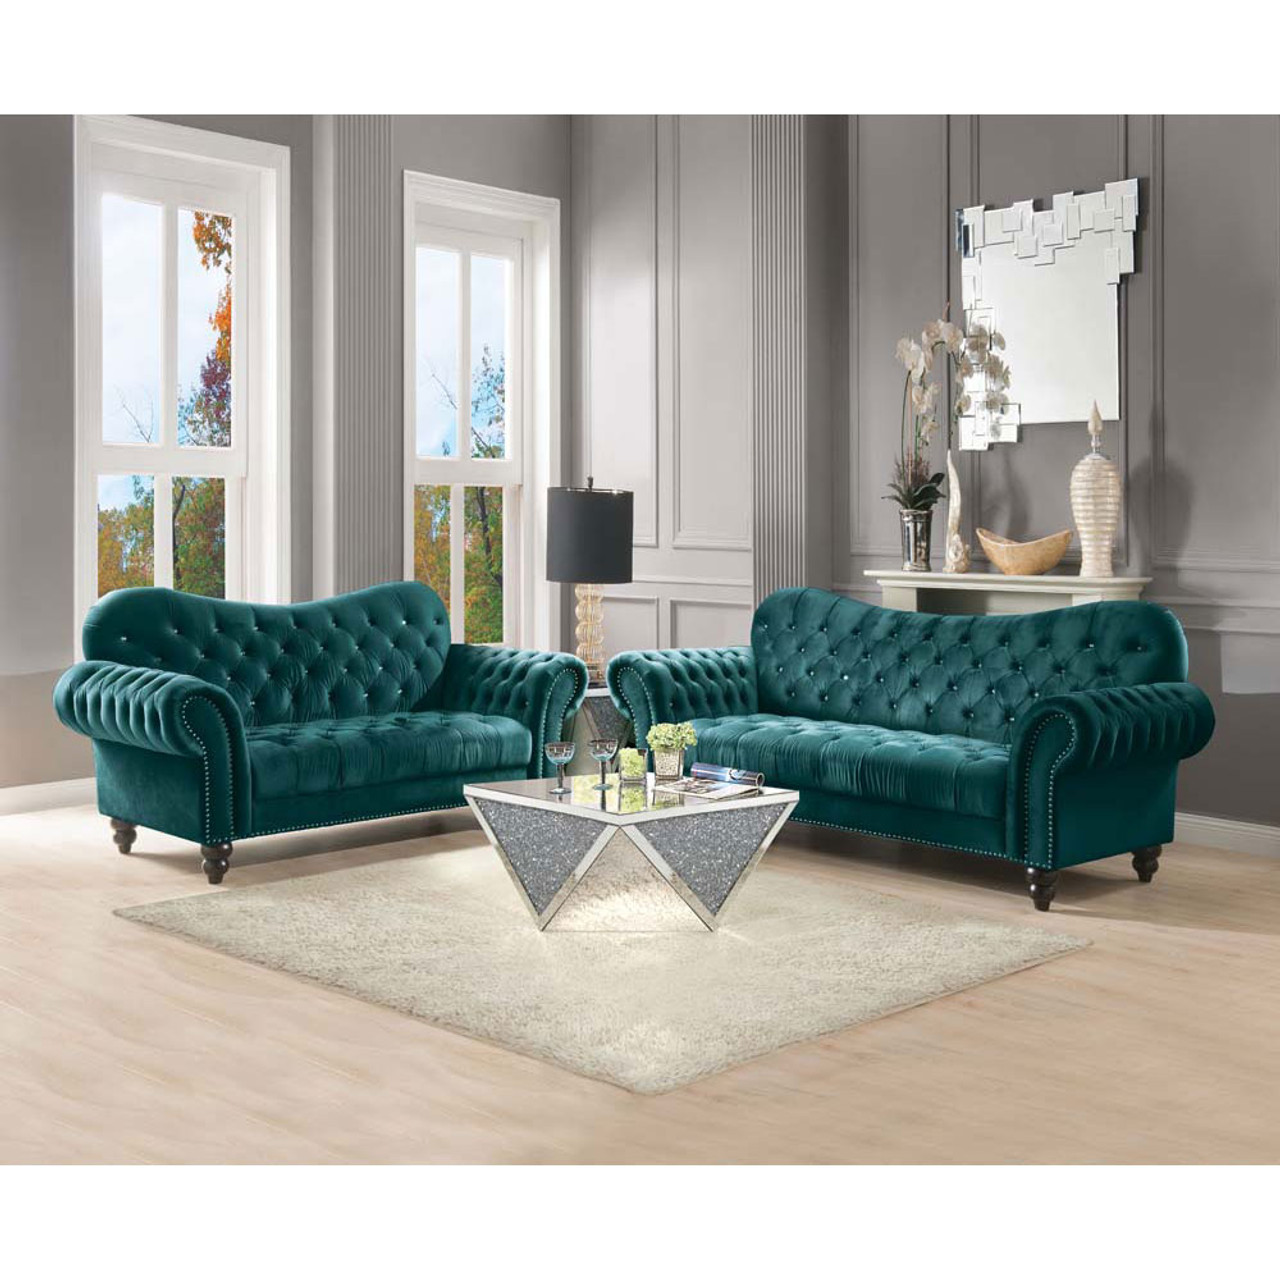 Safi Stationary Fabric and Leather Look LoveseatLoveseats-In Home